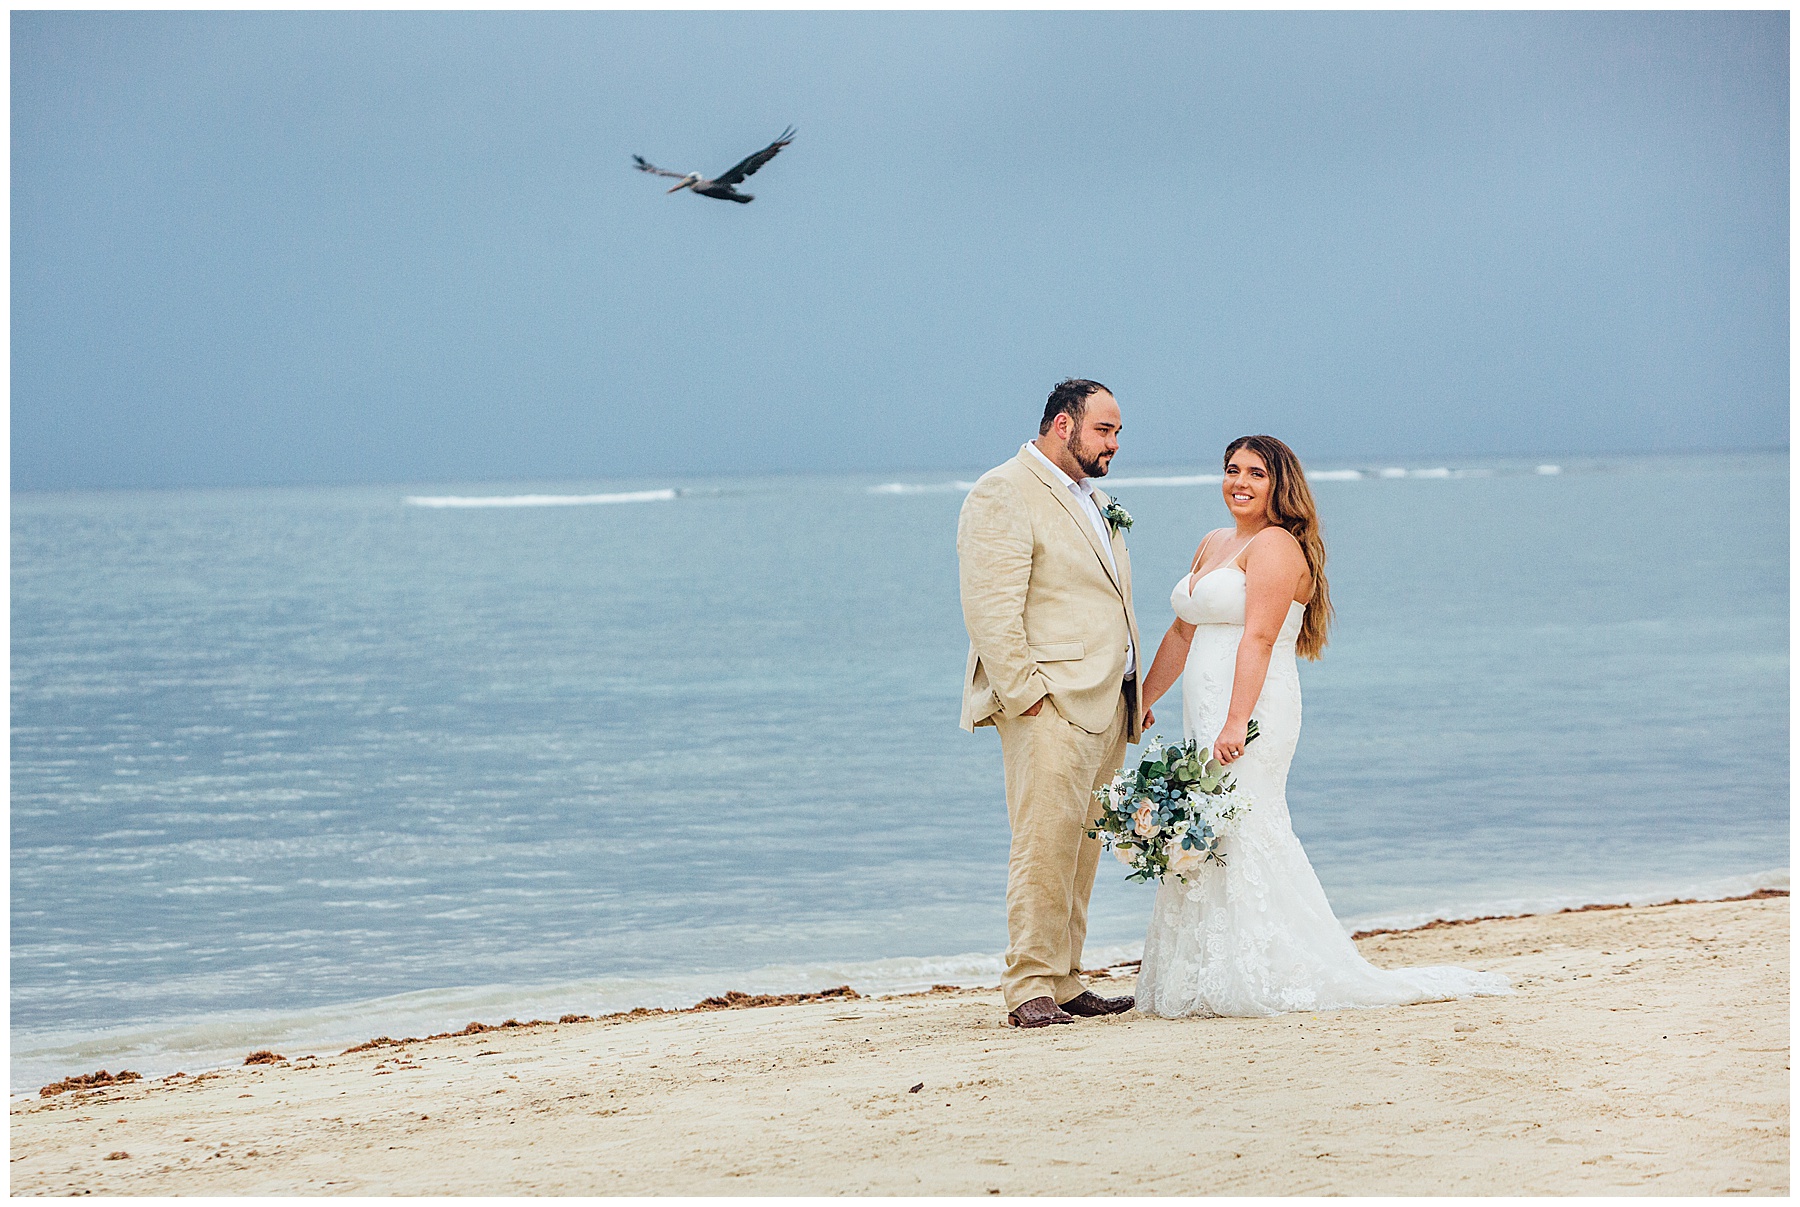 Bride and groom on beach with a seagul in background